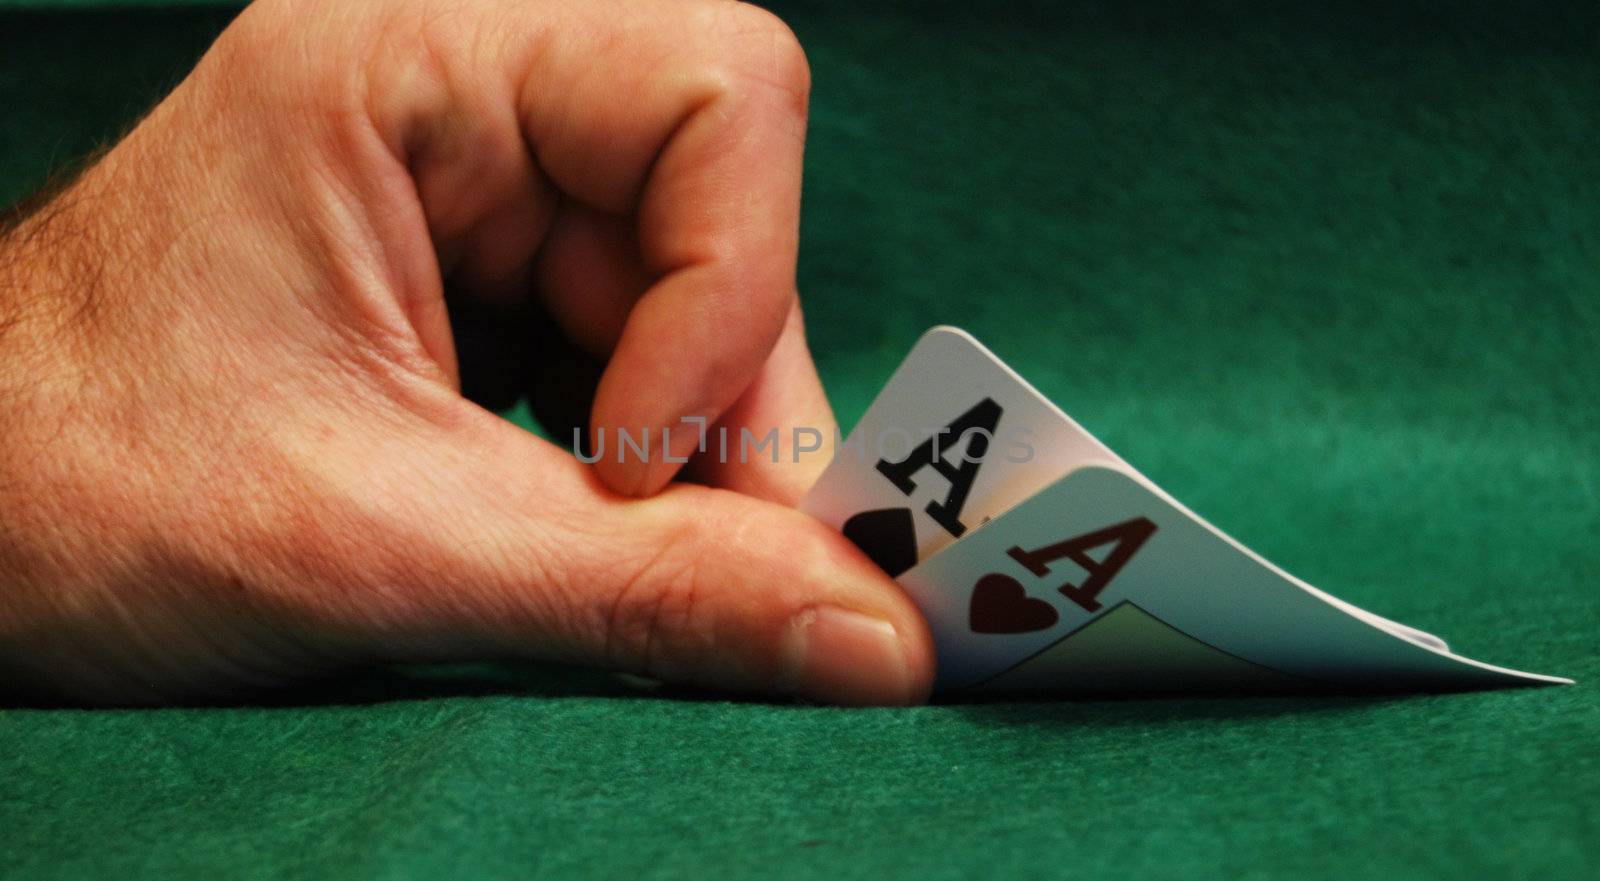 Gambler hand revealing ace of hearts on green table